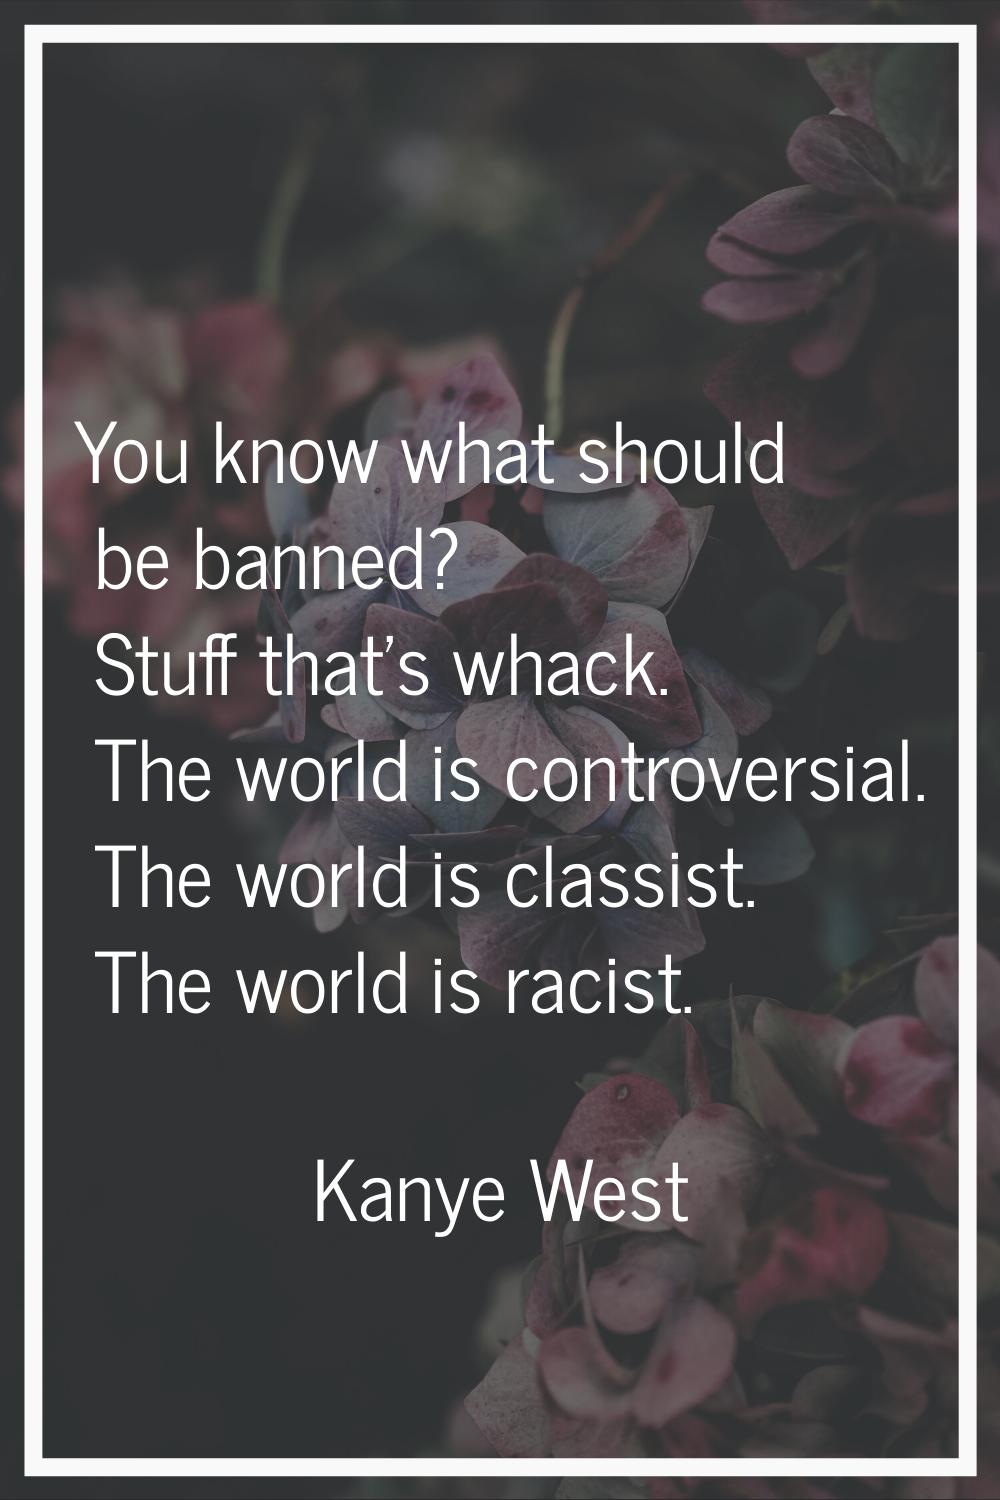 You know what should be banned? Stuff that's whack. The world is controversial. The world is classi